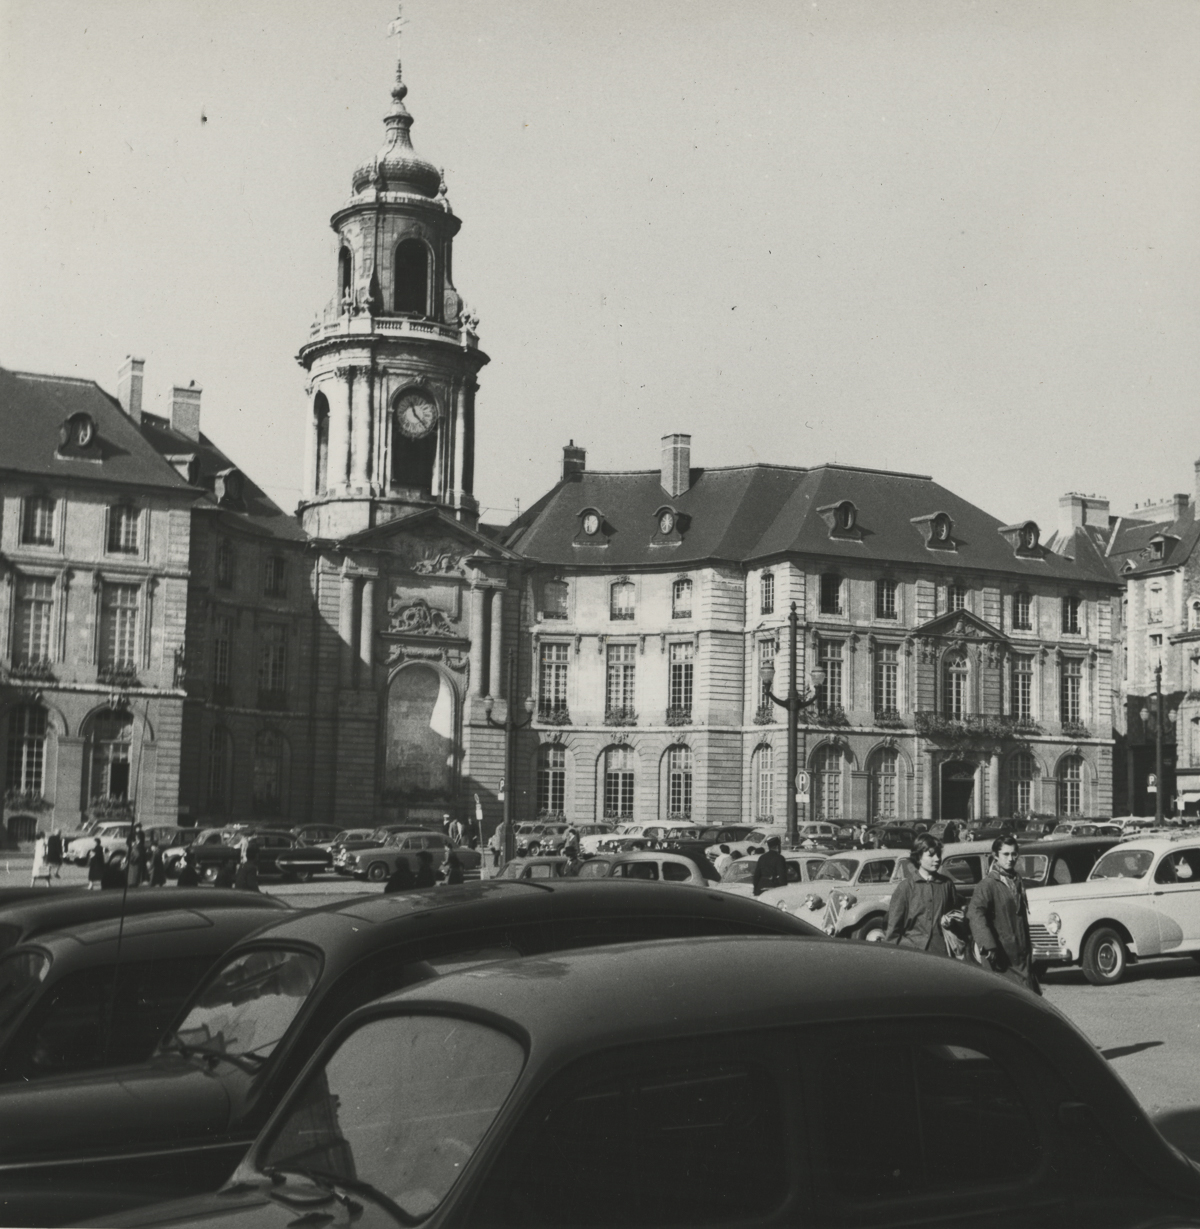 black and white photo of two buildings next to each other with a taller clock tower between them and a parking lot of cars in front of them all